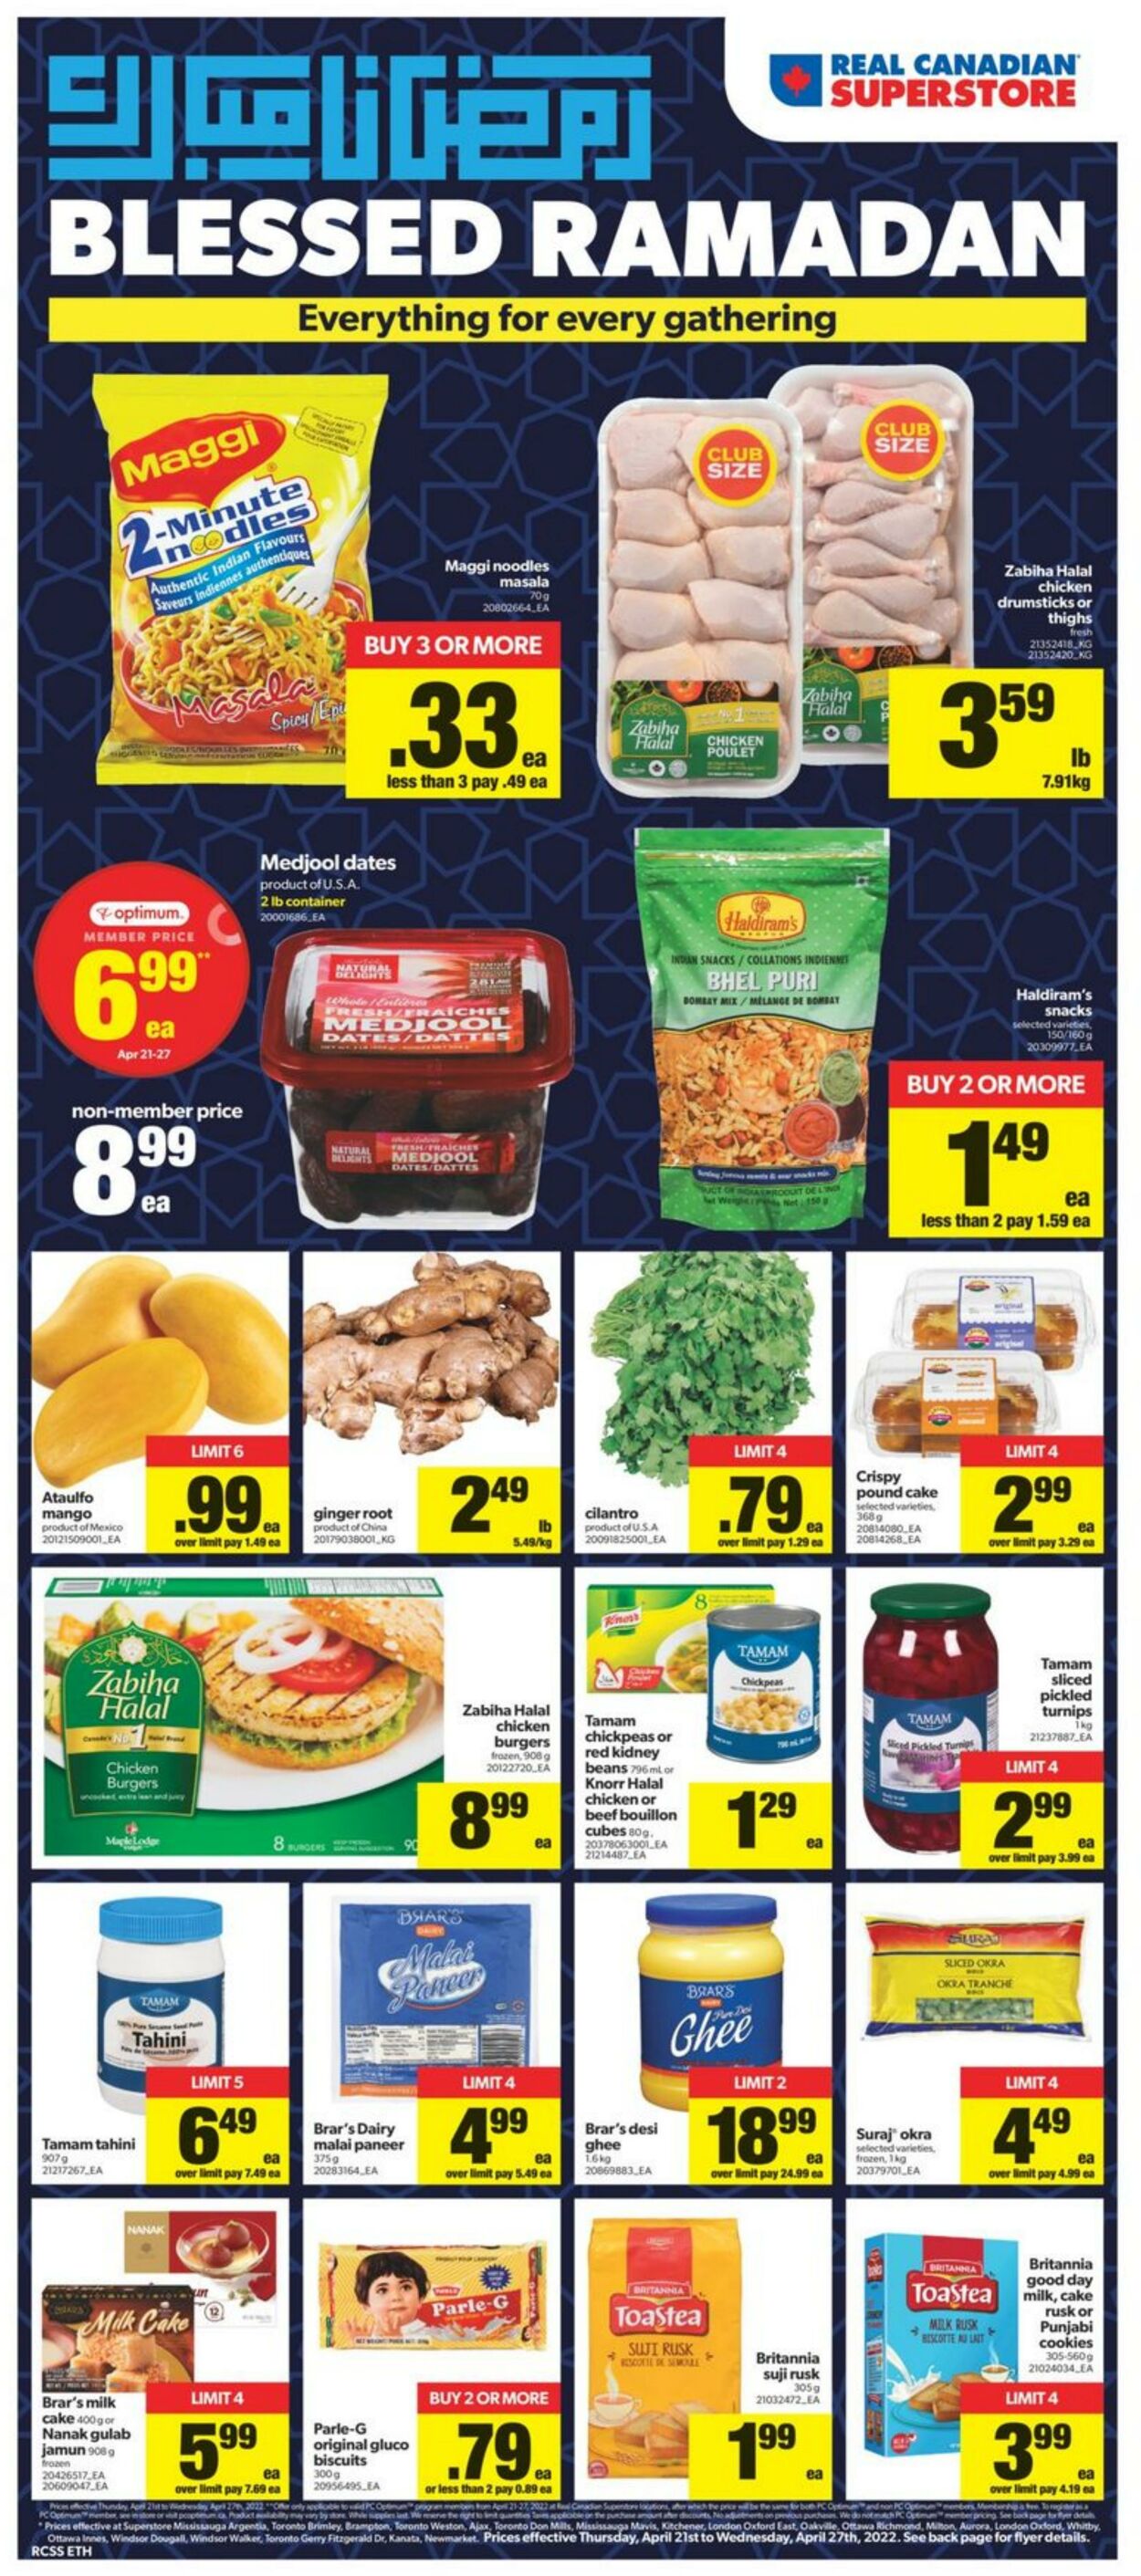 Flyer Real Canadian Superstore 21.04.2022 - 27.04.2022